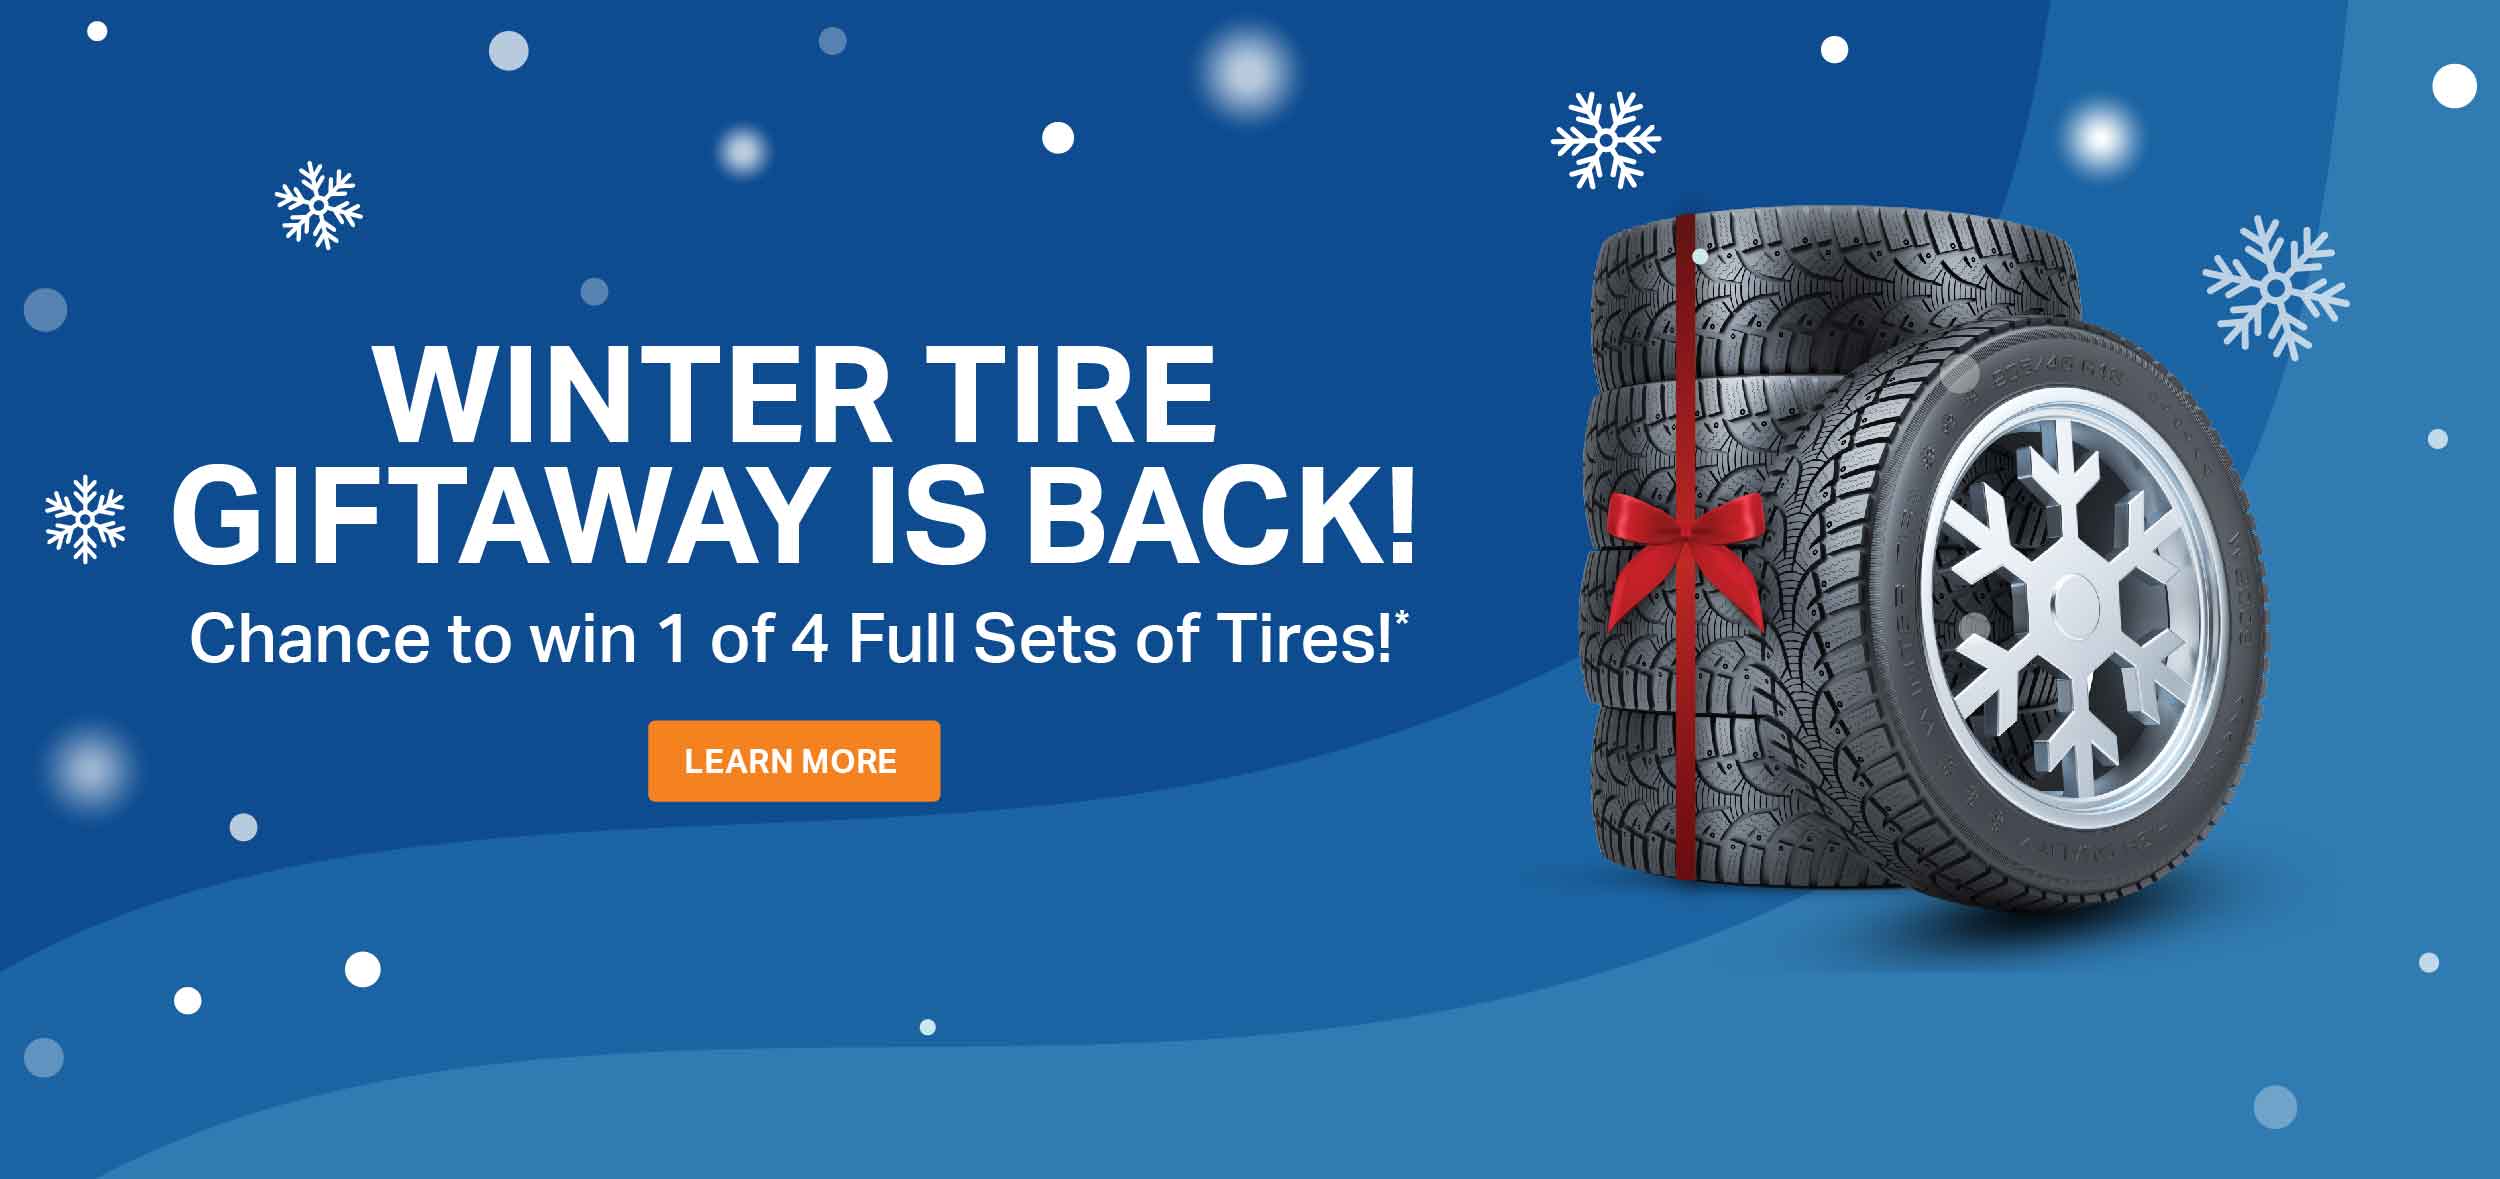 Winter Tire Giftaway is Back! Chance to win 1 of 4 Full Sets of Tires!*